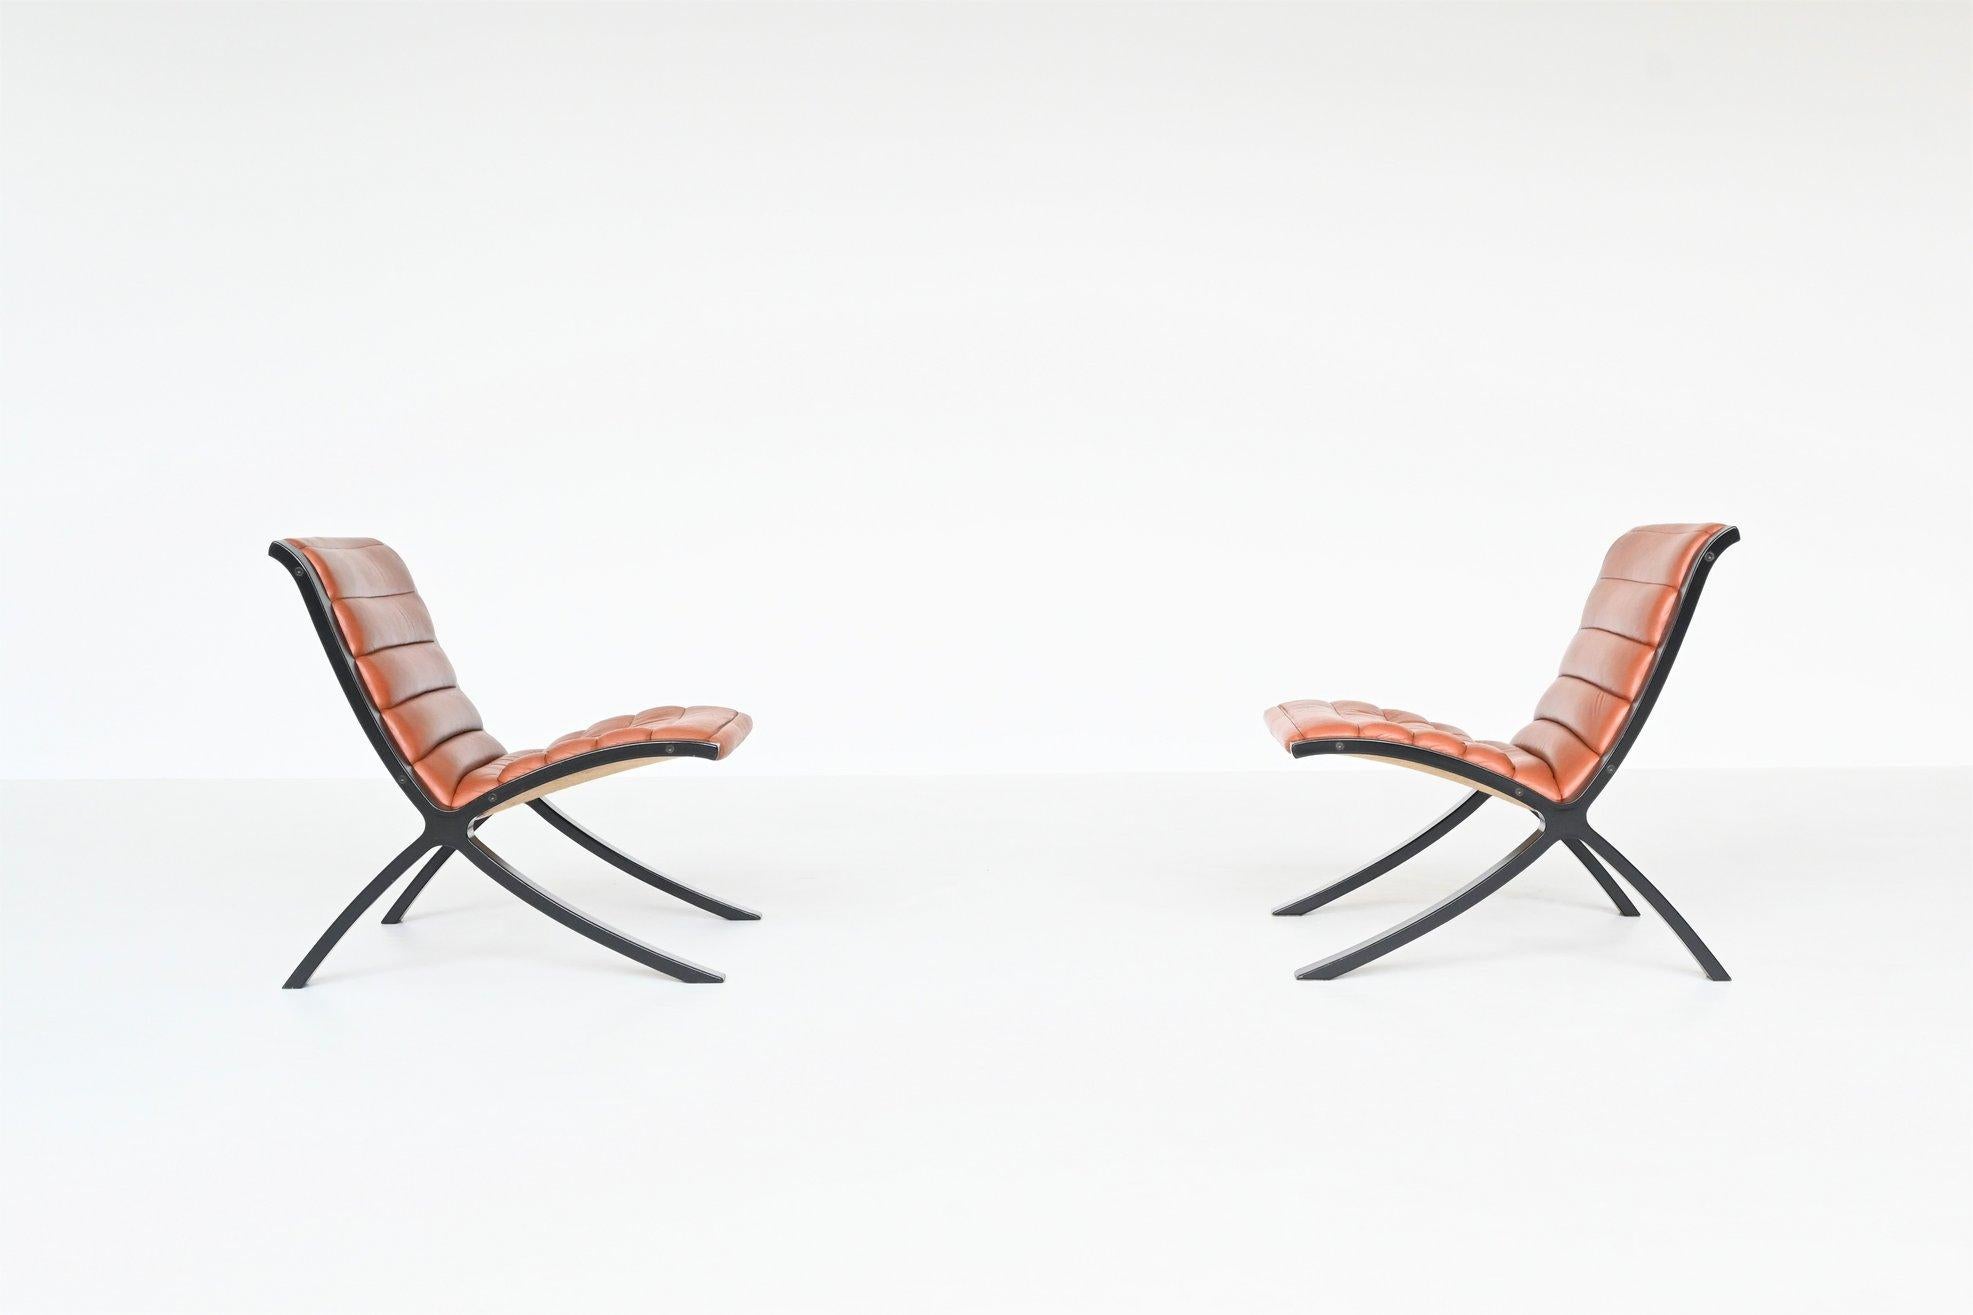 Fantastically shaped pair of lounge chairs model X-Chair designed by Peter Hvidt & Orla Molgaard-Nielsen for Fritz Hansen, Denmark 1979. These sculptural chairs feature a black lacquered beech plywood frame with padded brown leather upholstery. The